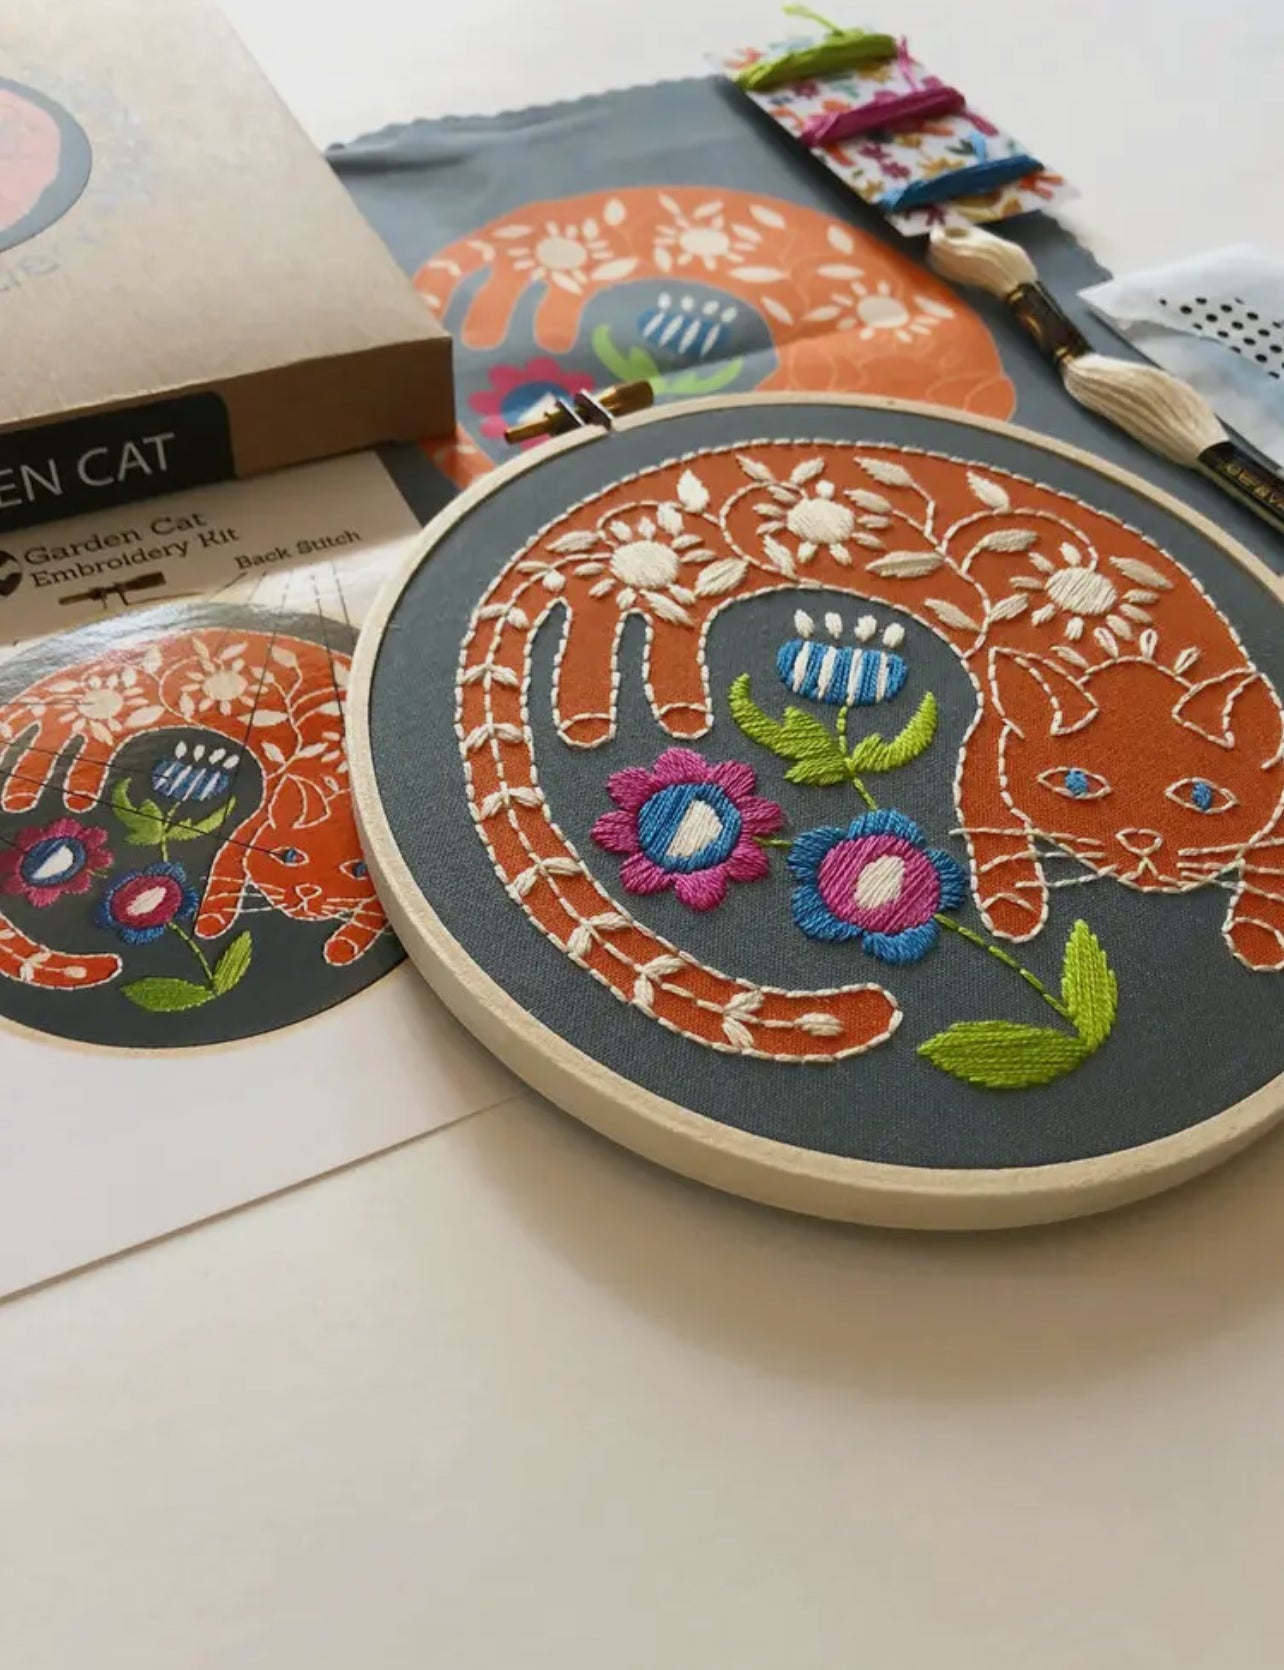 Rikrack Embroidery Kits: Cross-stitch for beginners!